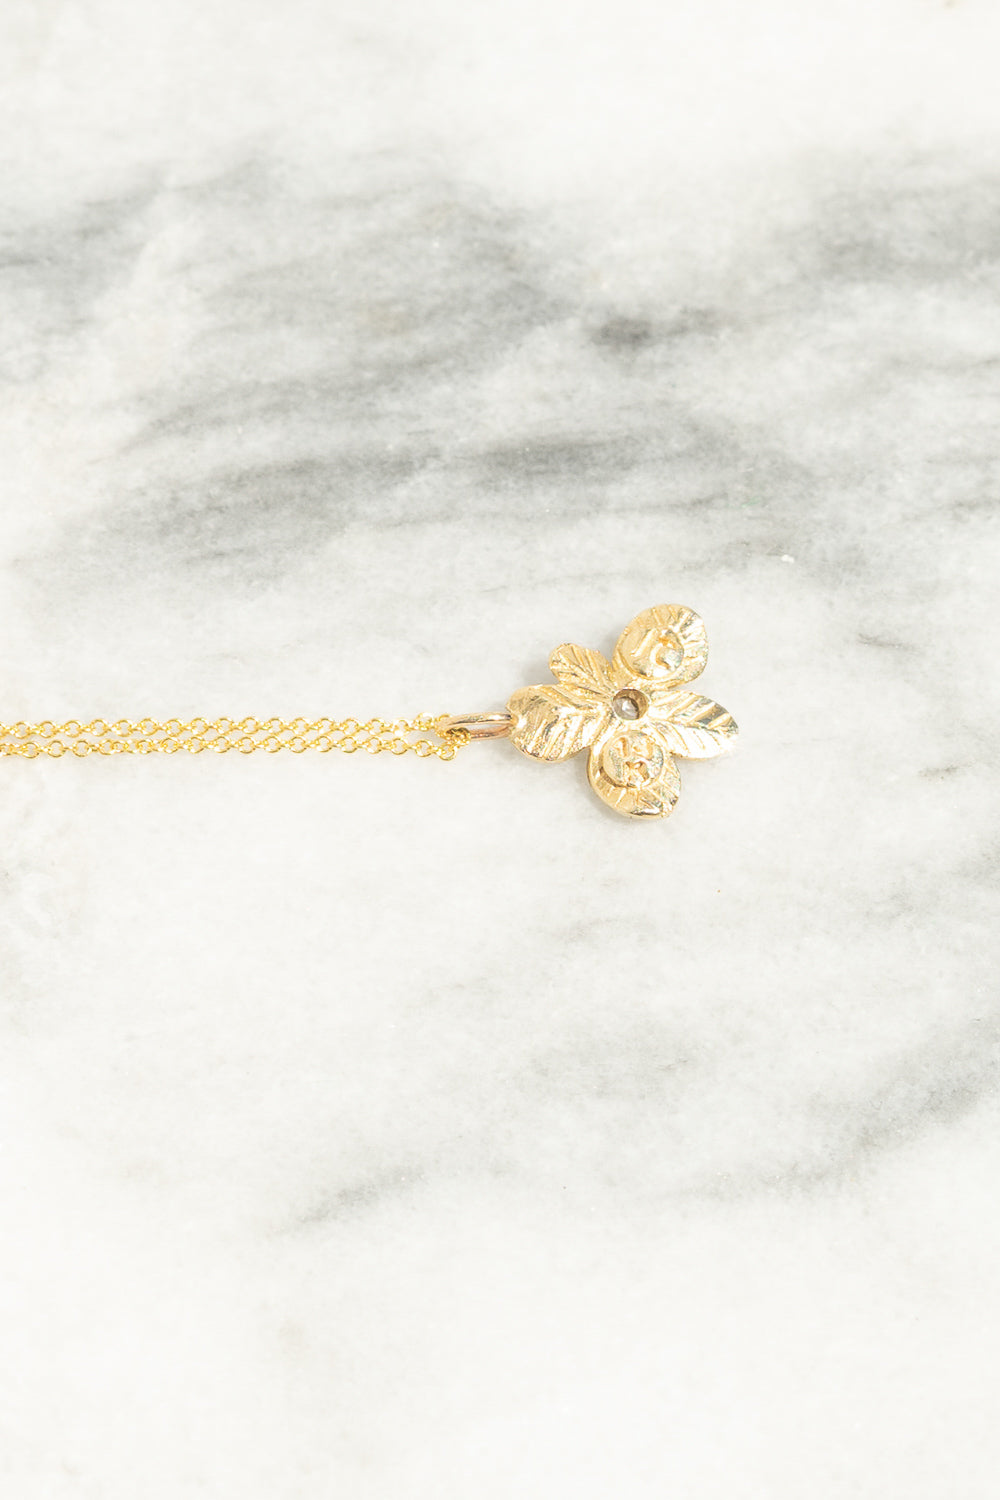 back view of gold flower charm pendant necklace